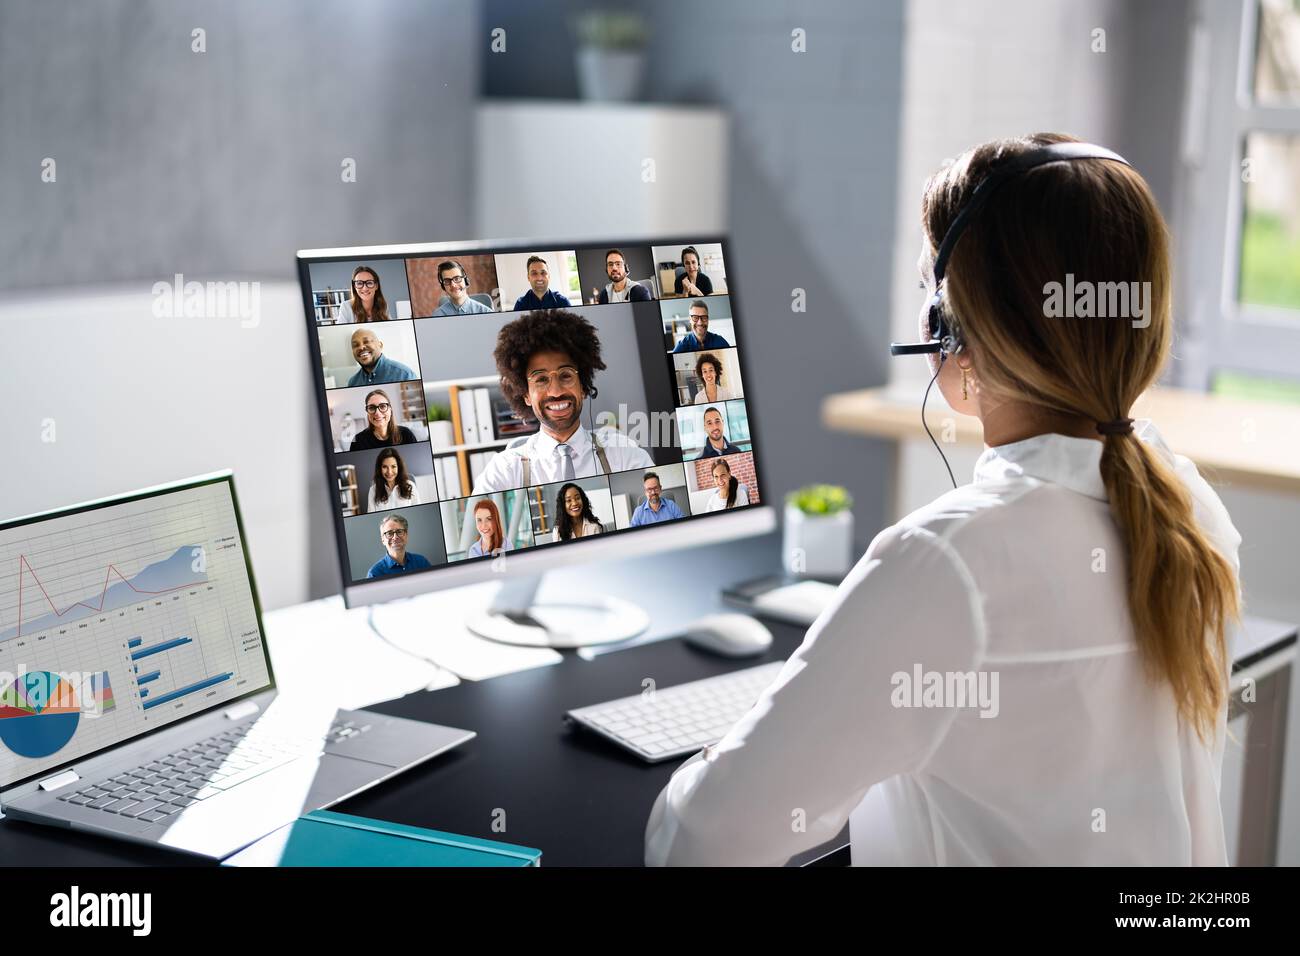 Online Video Conference Virtual Meeting On Multiple Screens Stock Photo